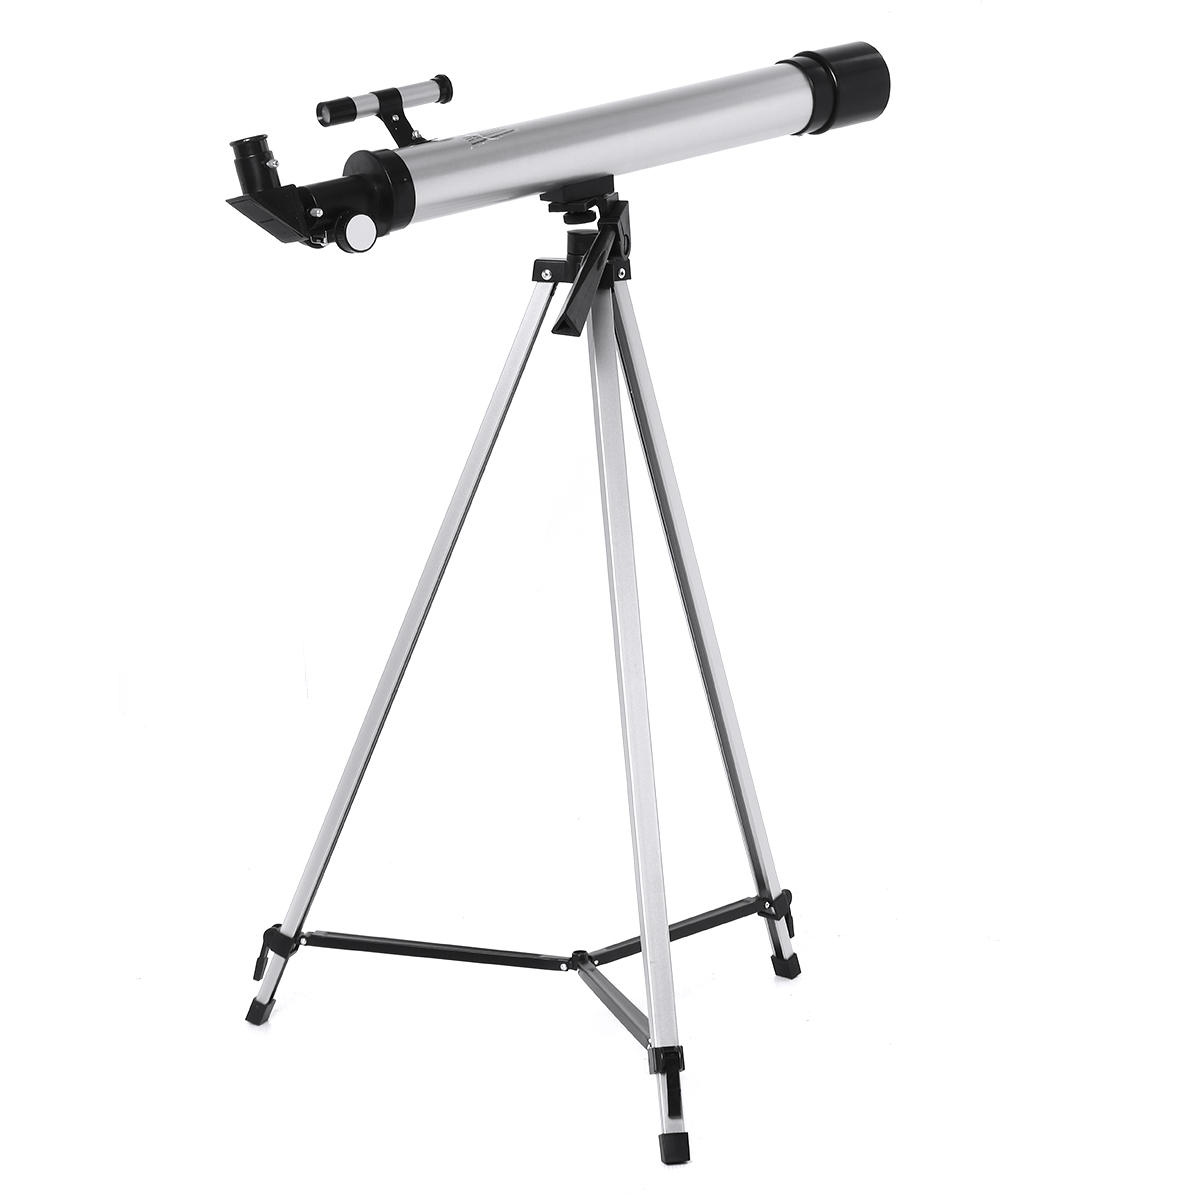 Professional Reflector Astronomical Telescope + Adjustable Tripod Science Education For Gift